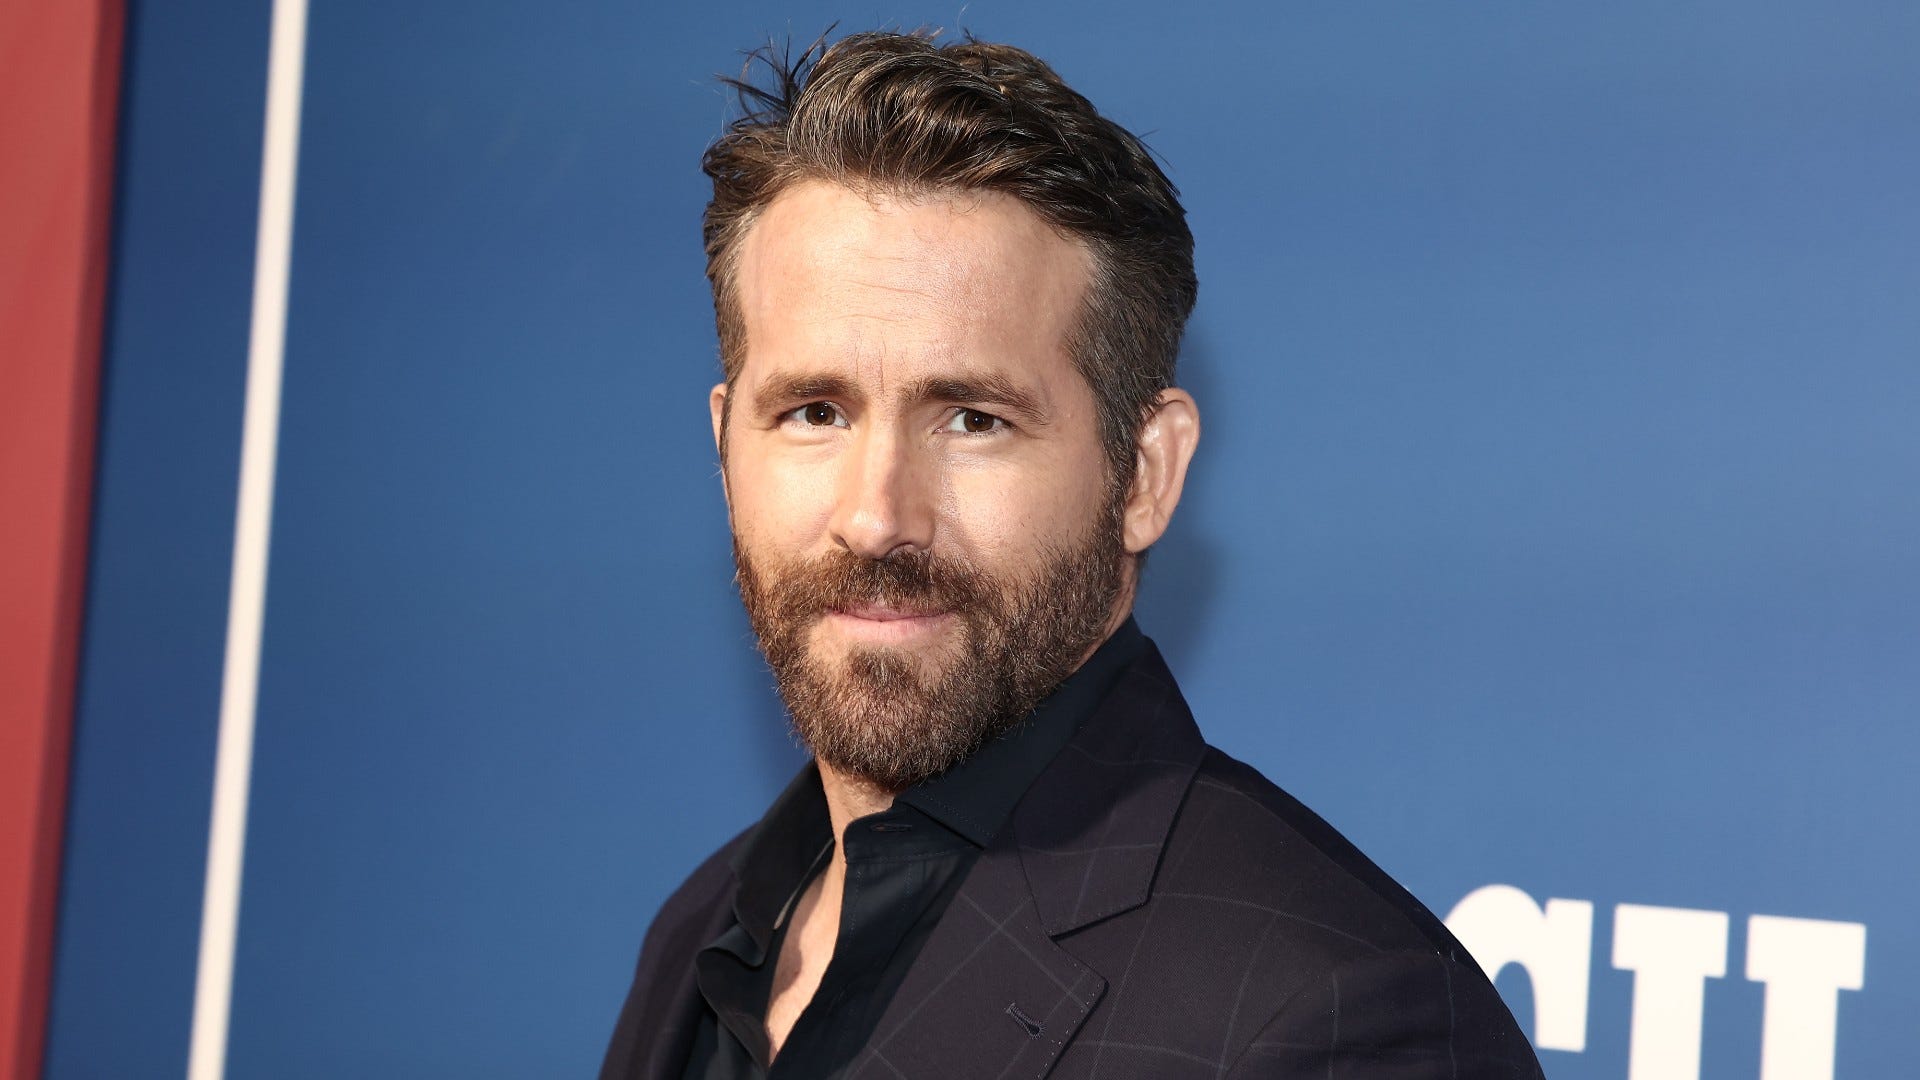 A Top 10 Life Moment Ryan Reynolds Loves Incredible 30 Yard Chip From Mullin As Wrexham